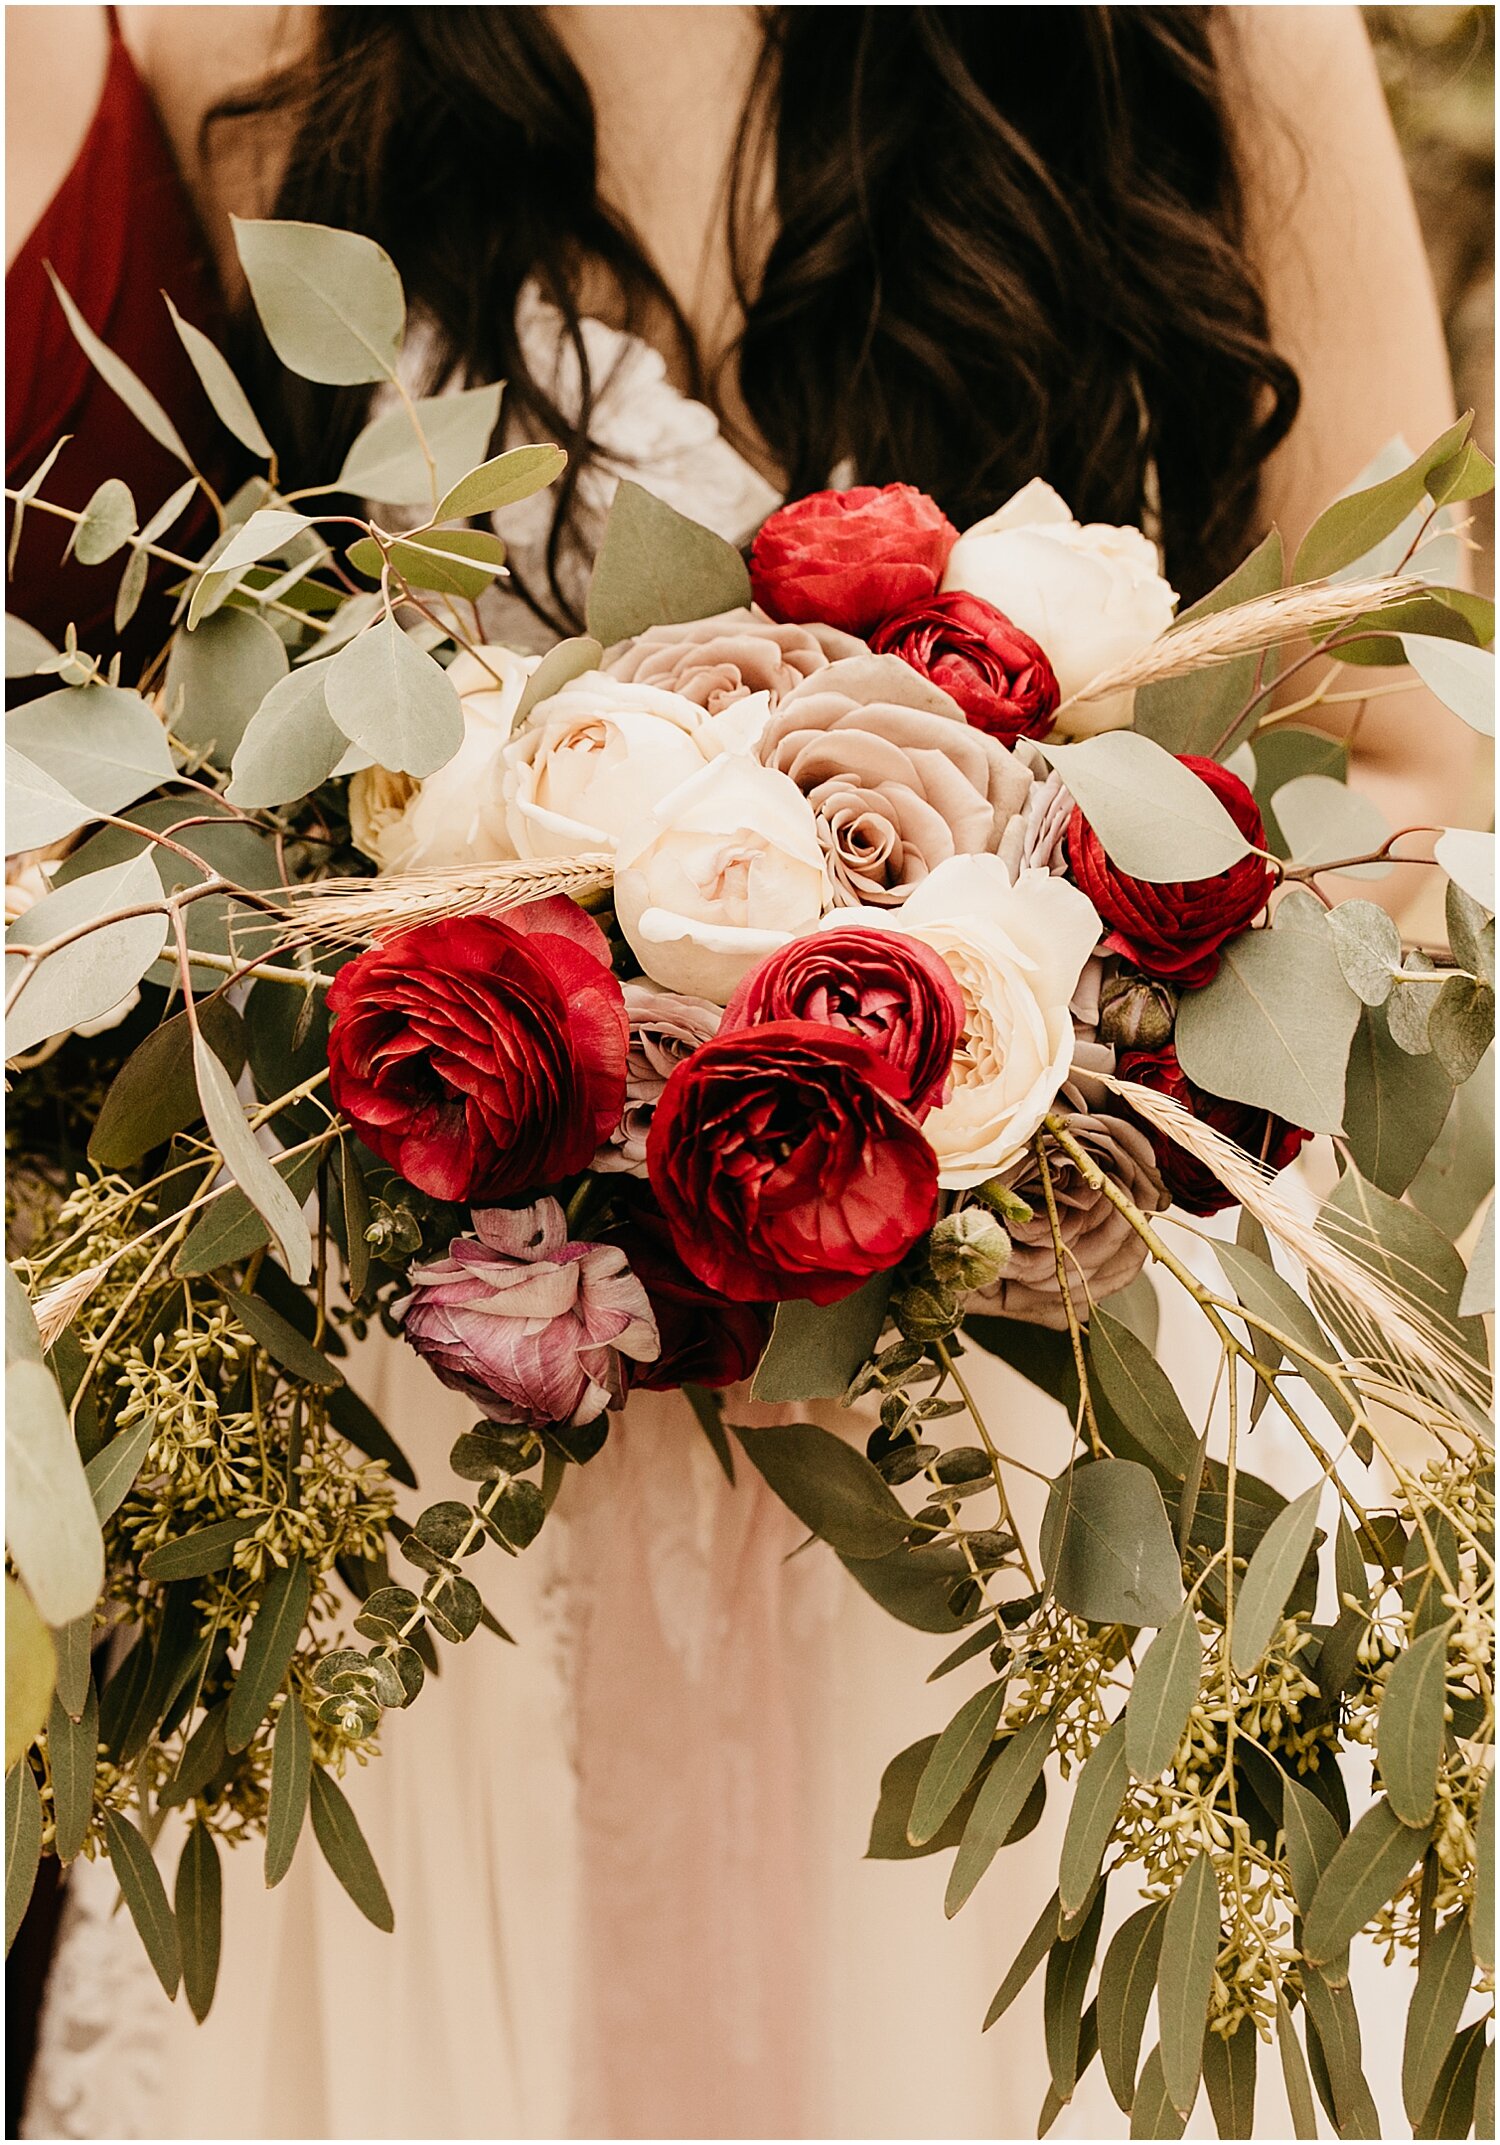  lovely wedding bouquet with white and red roses 